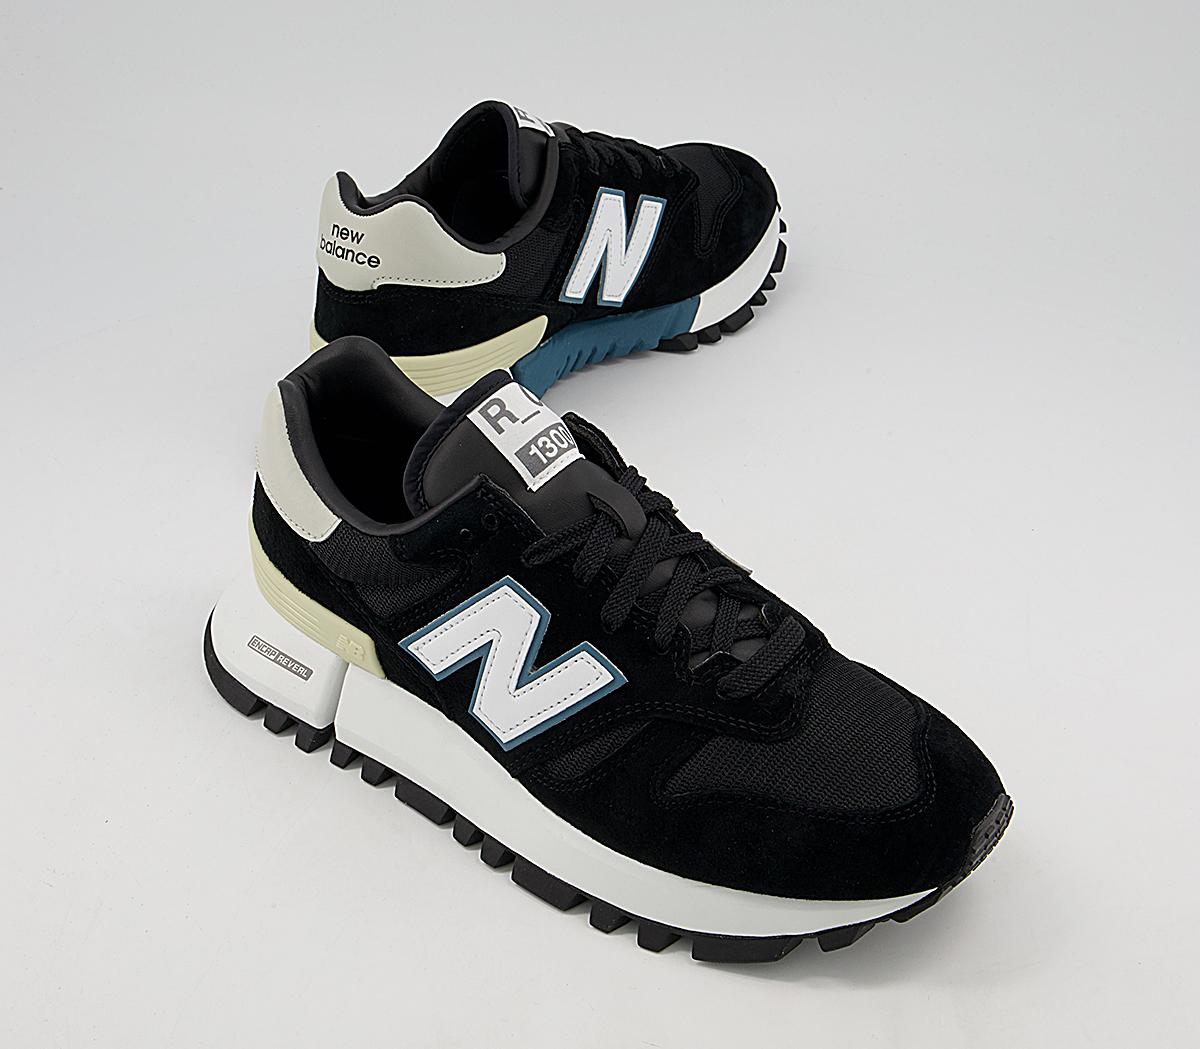 New Balance Rc1300 Trainers Black Grey - Men's Trainers